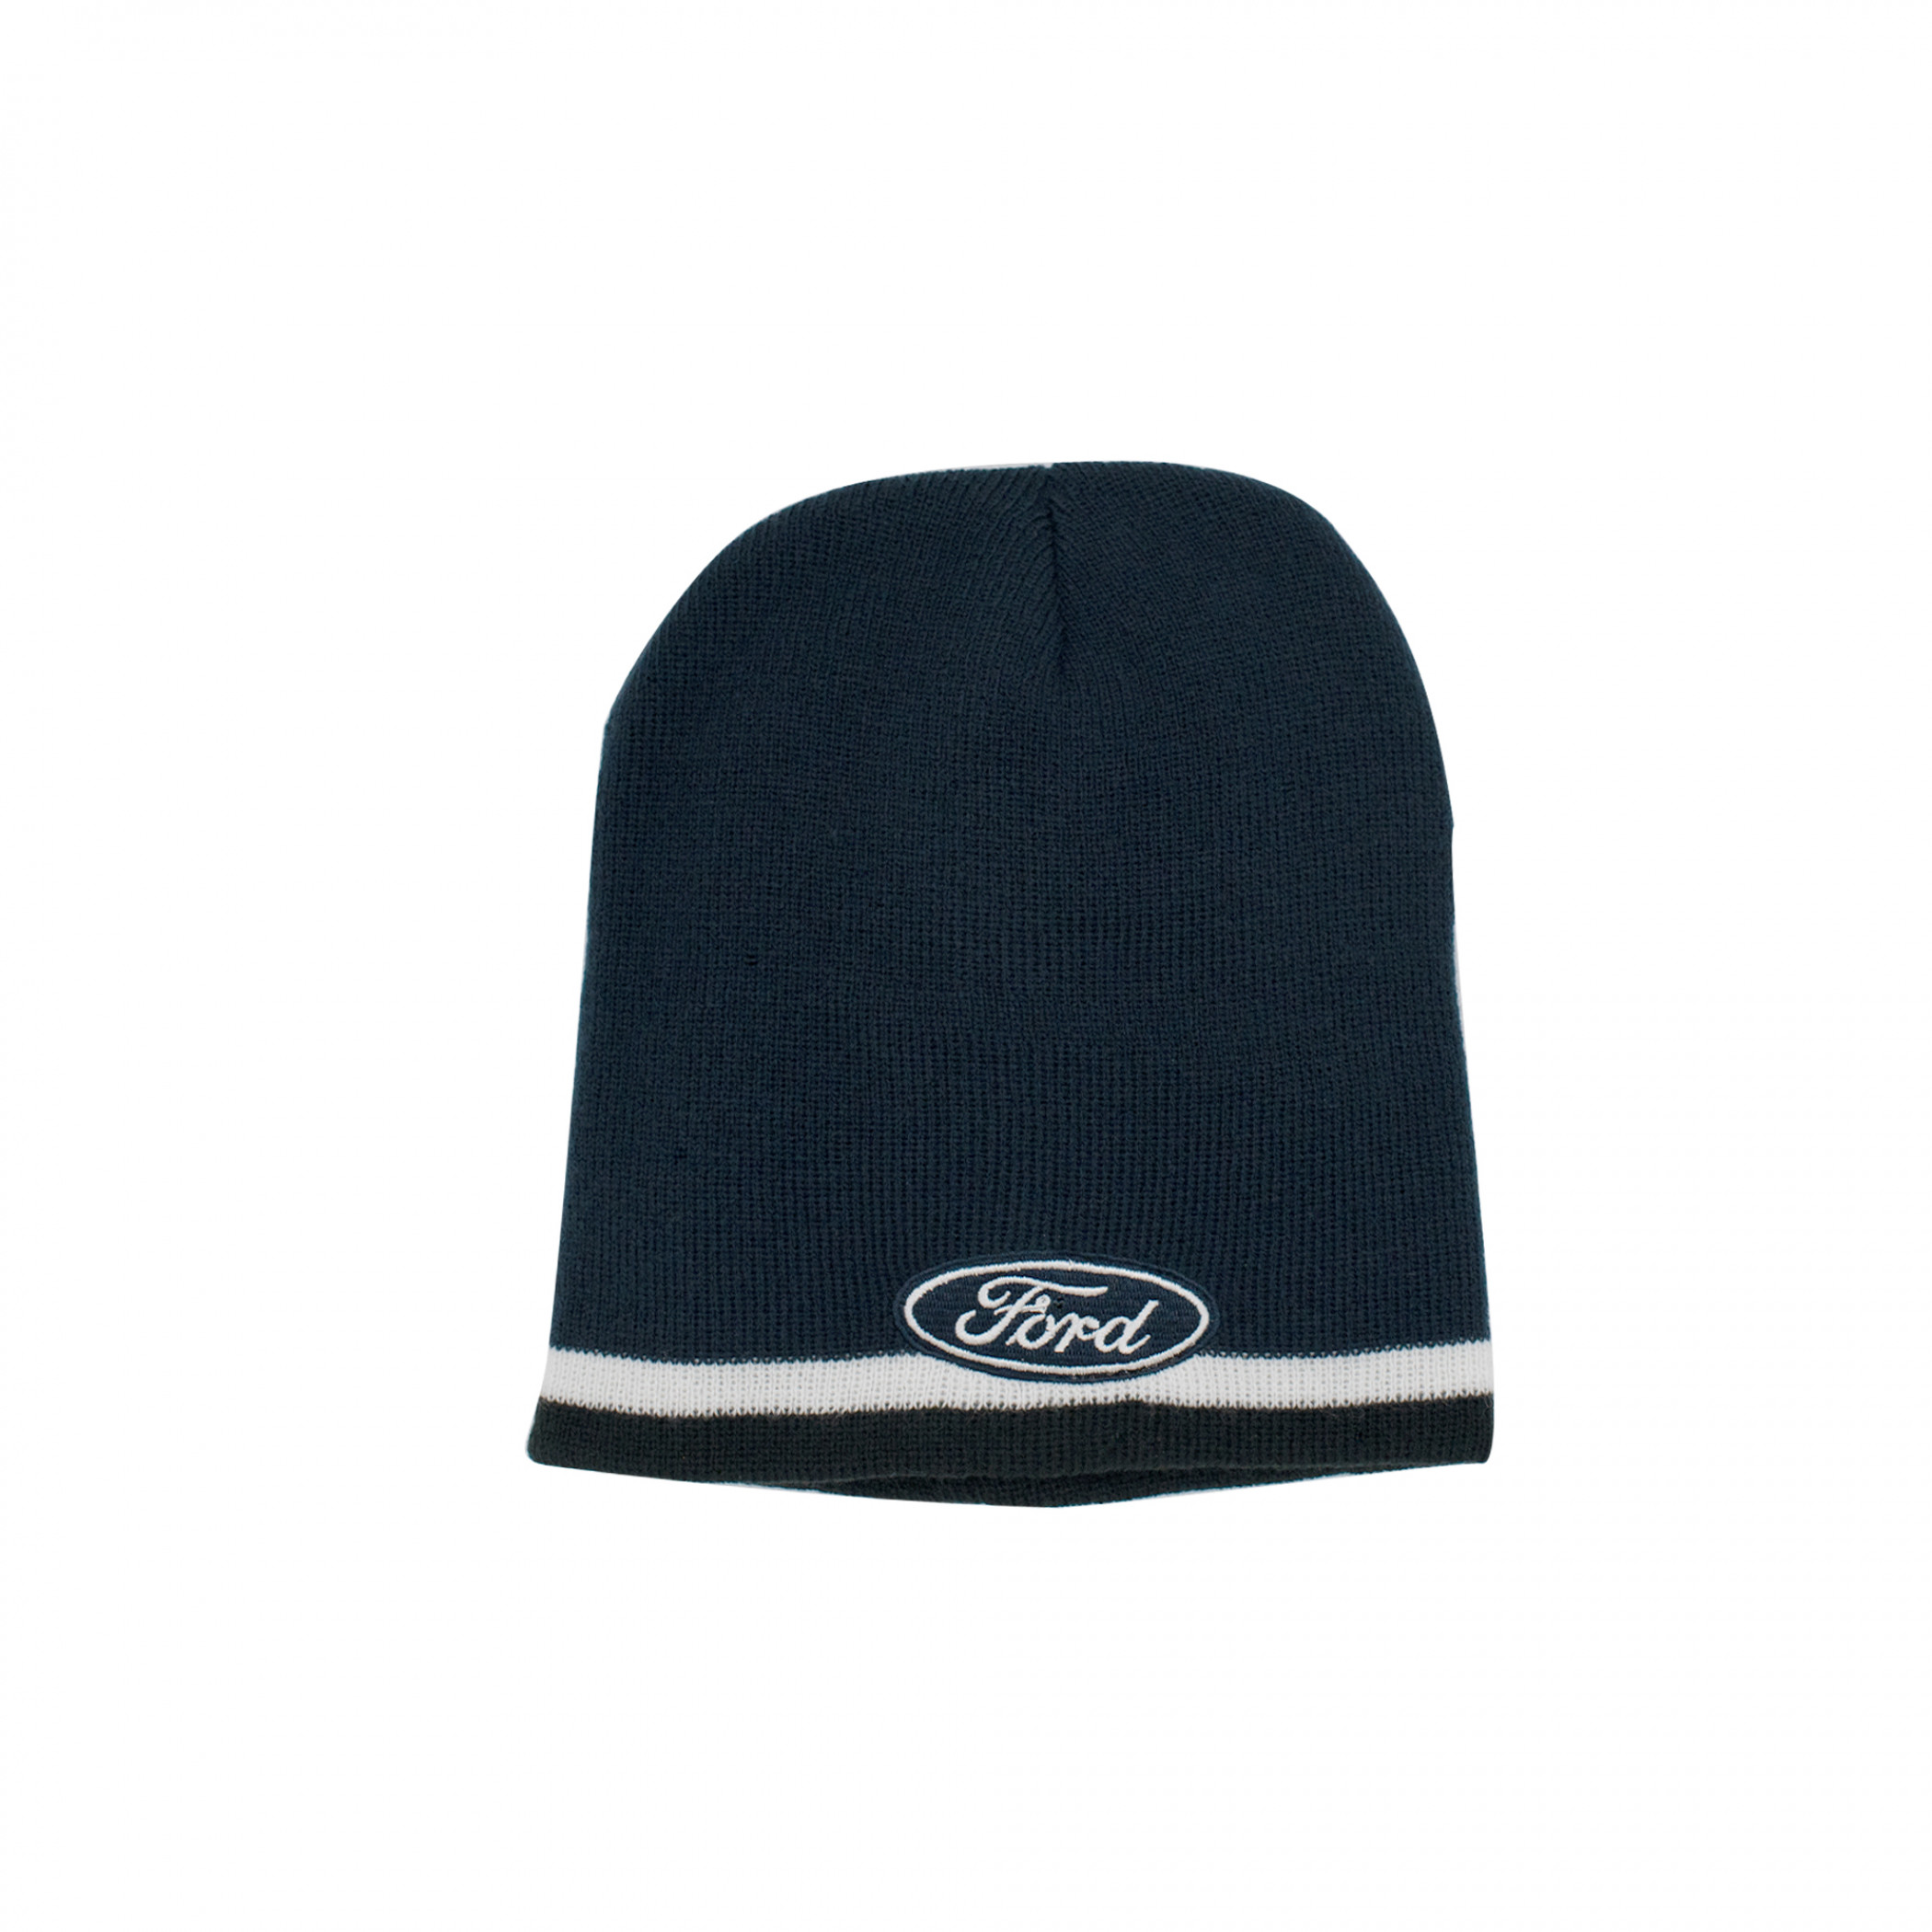 Ford Motor Co. Oval Logo Striped Knit Beanie